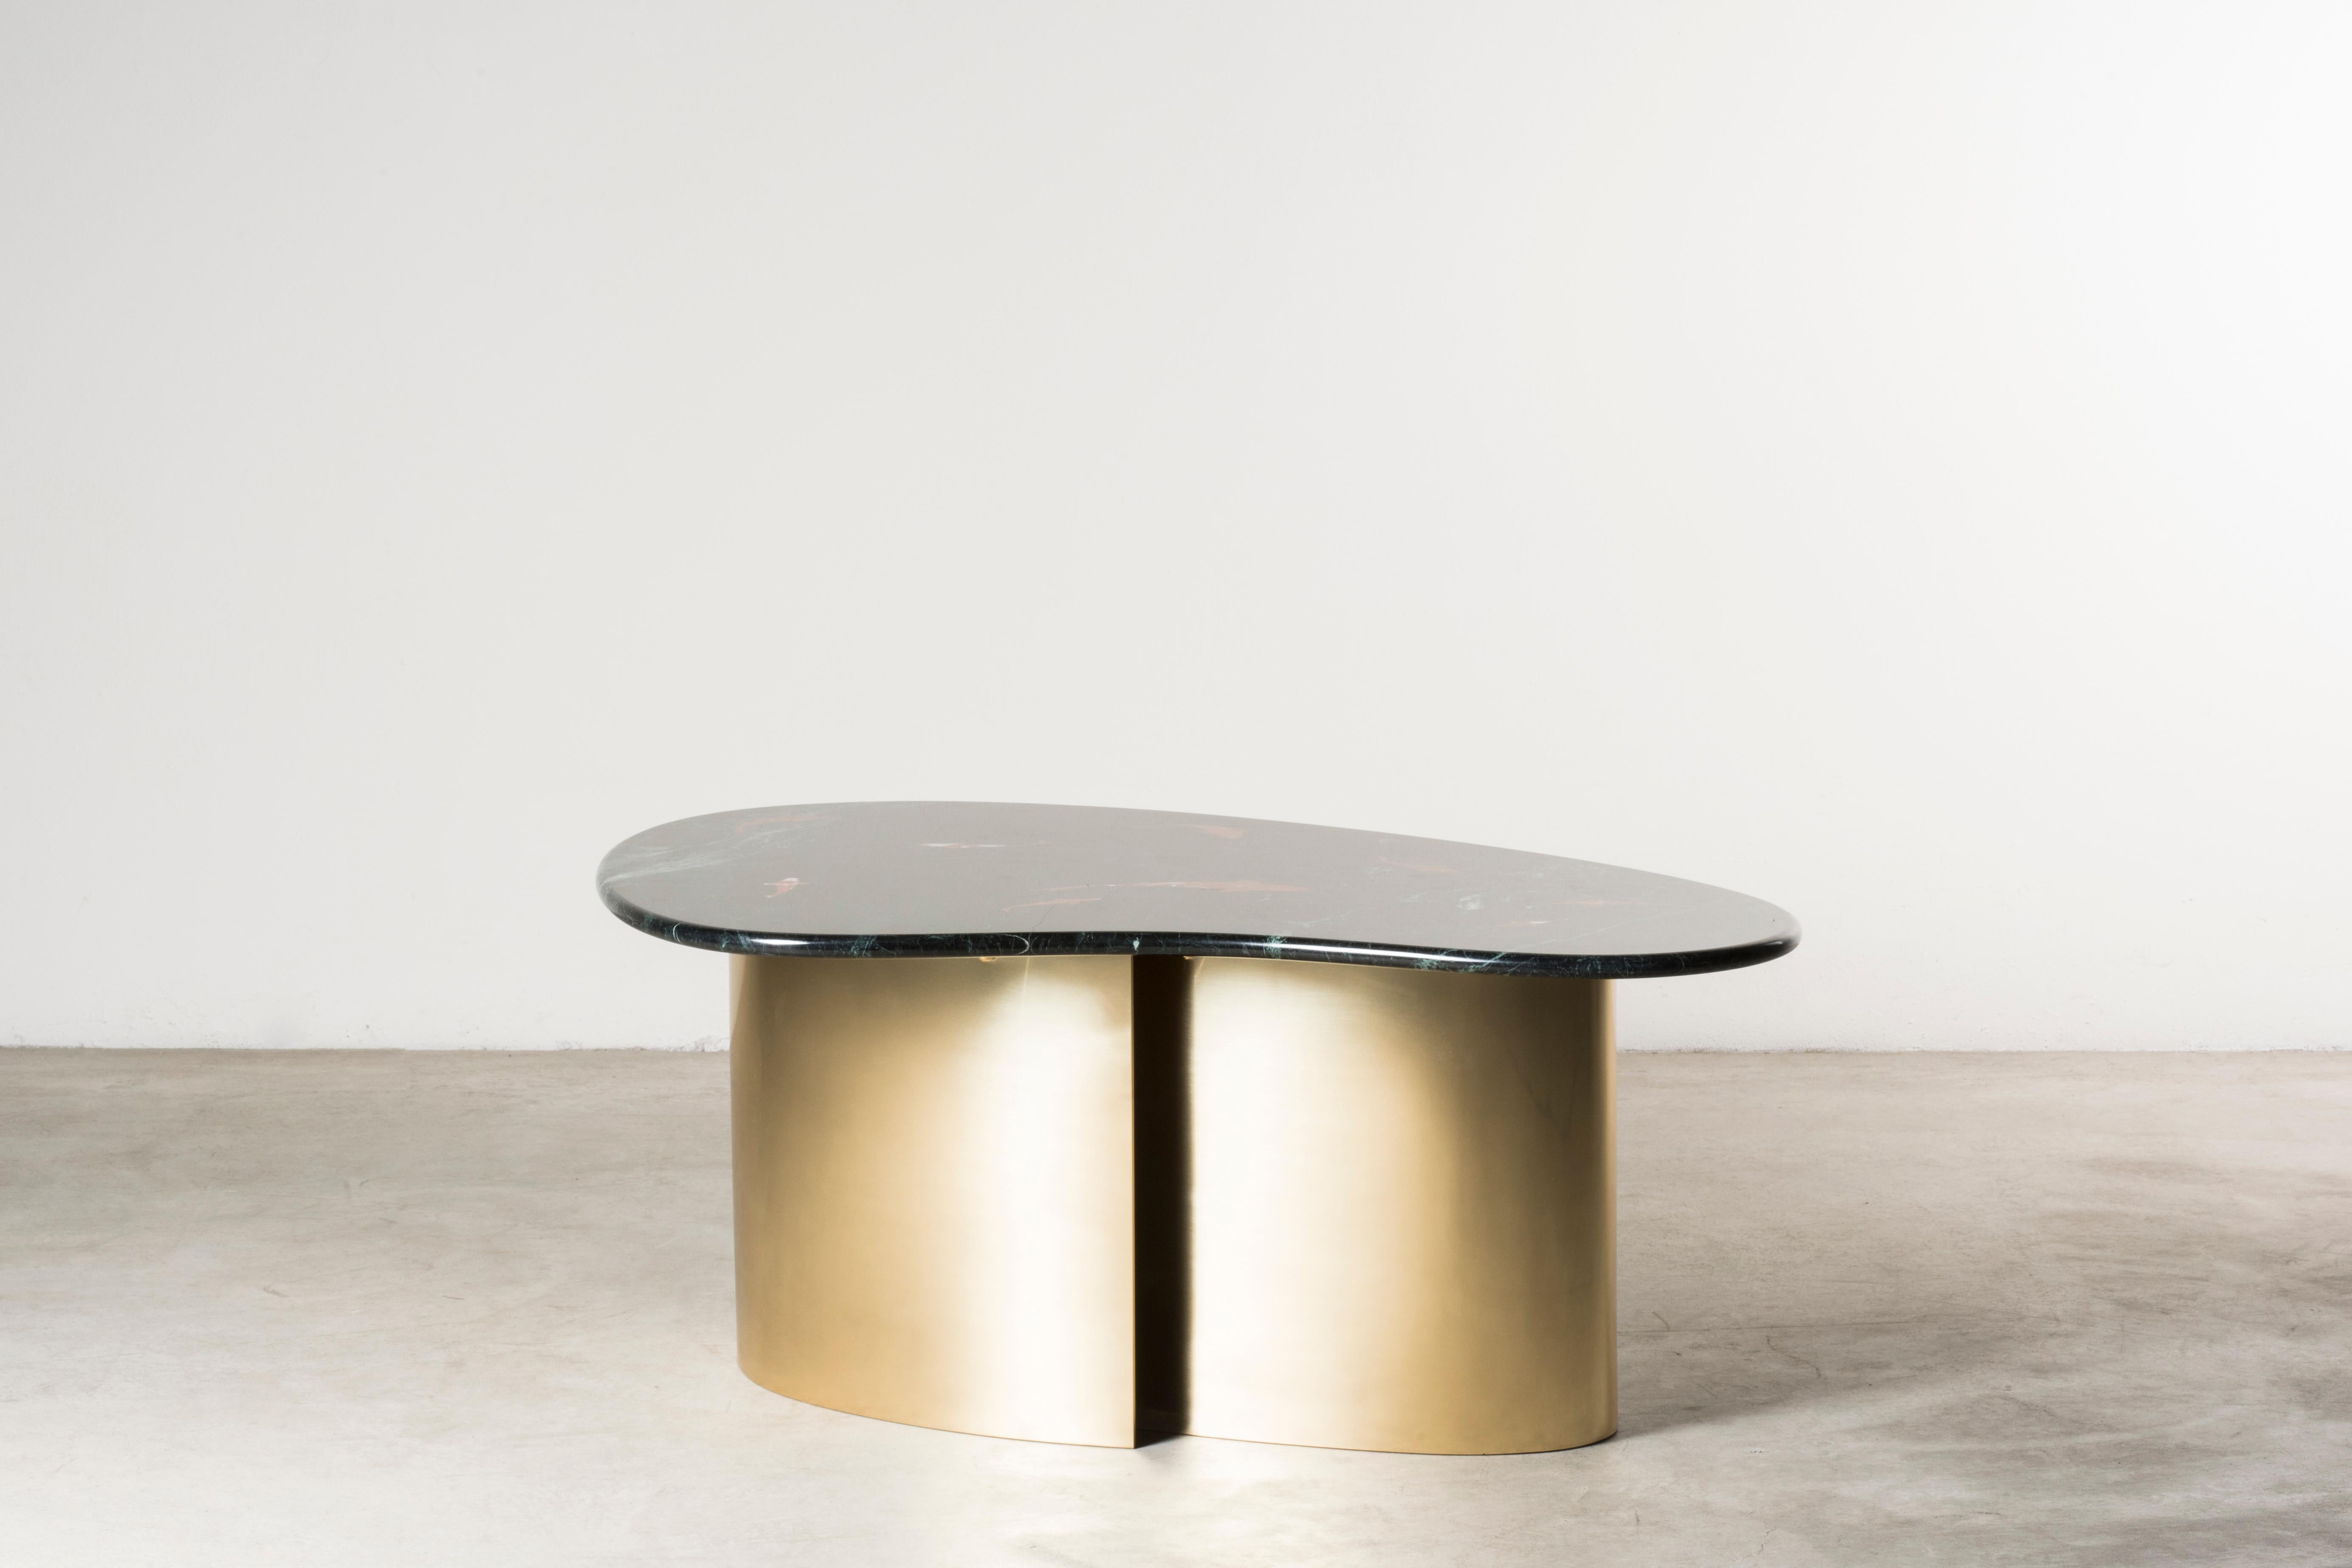 Goldfish low table by Analogia Project
Italy, 2018. Nilufar Edition. Marble, brass. 110.5 x 75 x H 40 cm. 43.5 x 29.5 x H 15.7 in.
Please note: Prices do not include VAT. VAT may be applied depending on the ship-to location.